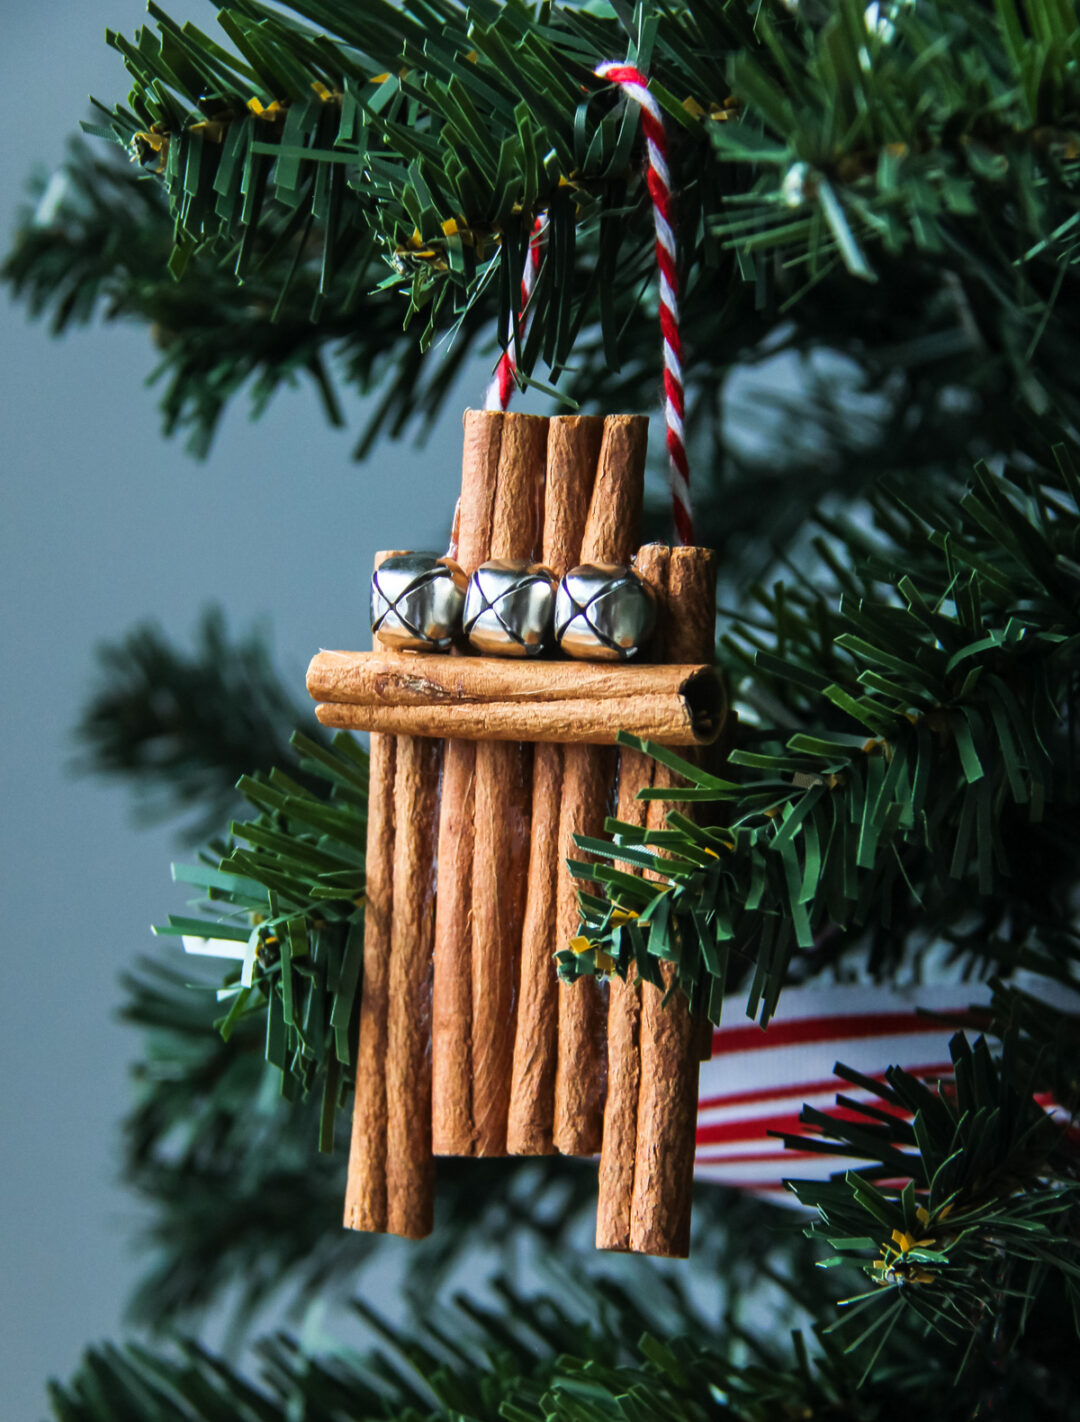 Cinnamon Stick Craft Projects - A Little Craft In Your Day